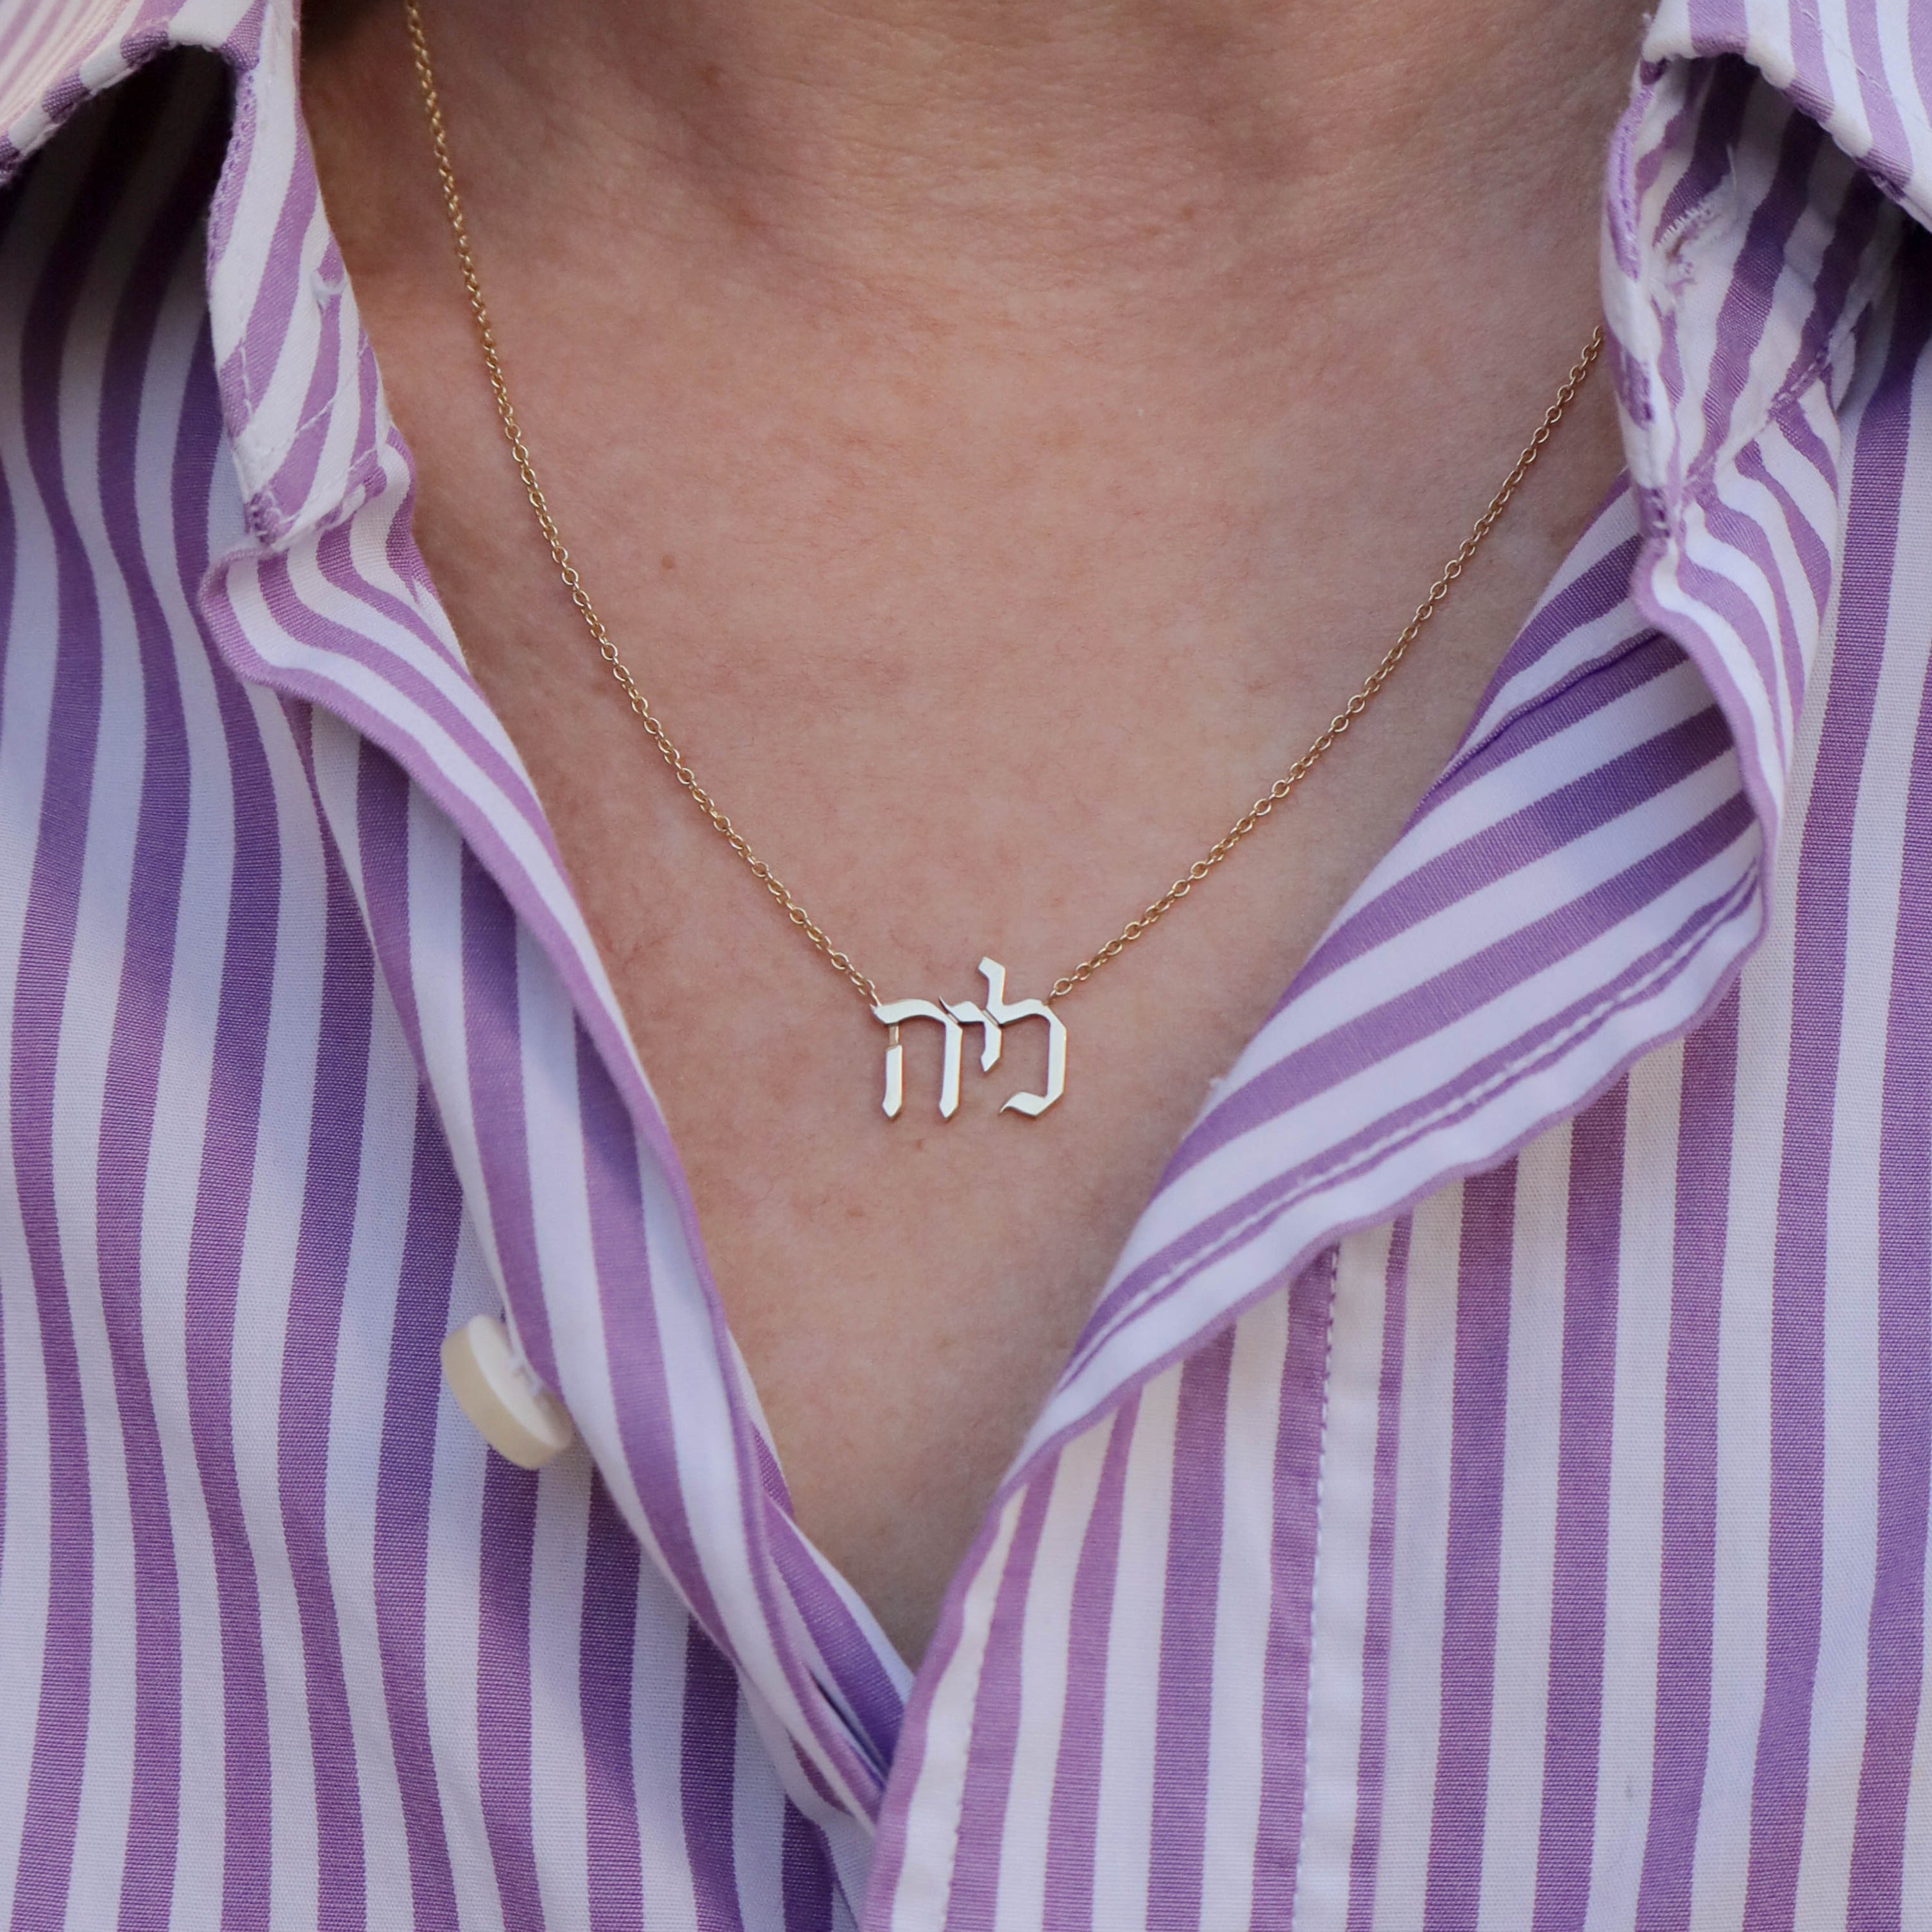 Hebrew Name Necklace - Large